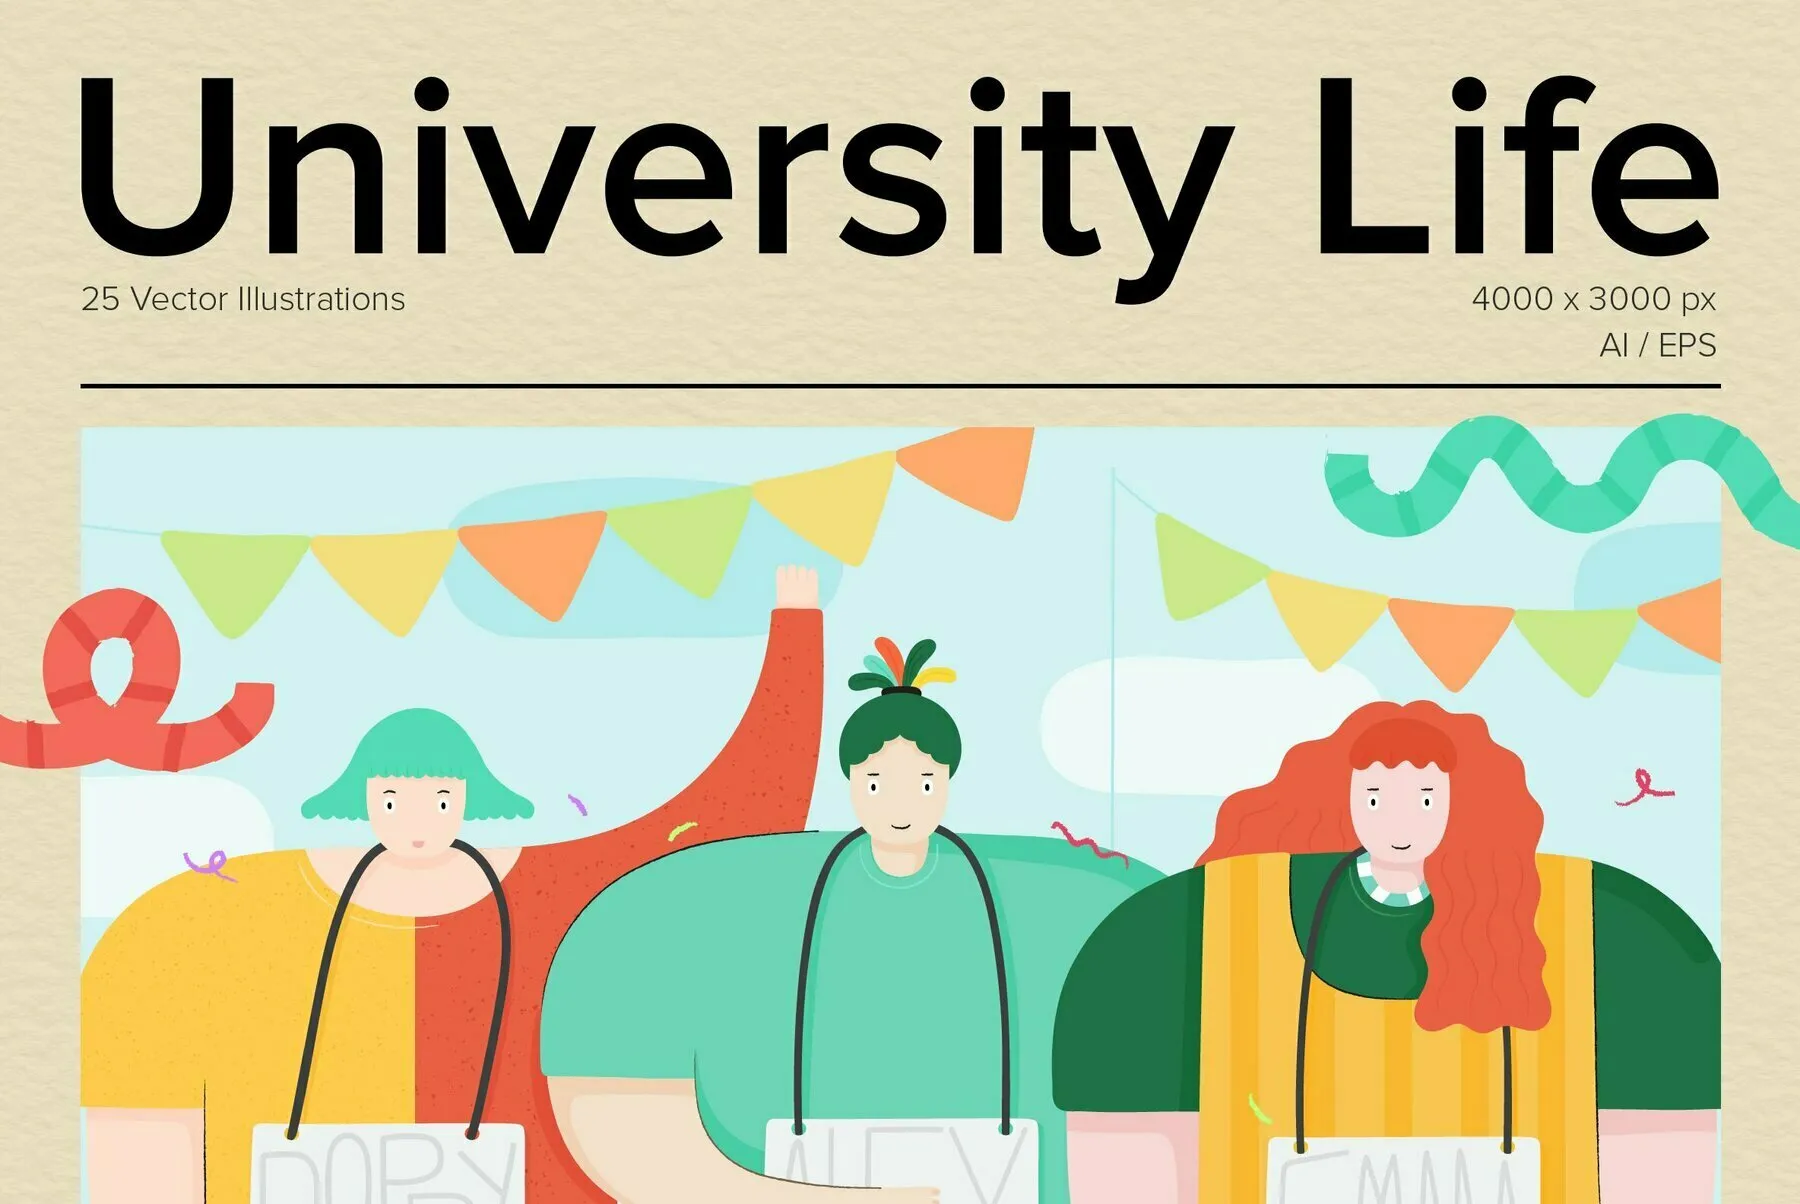 University Life Illustrations - Creative Graphics for Students